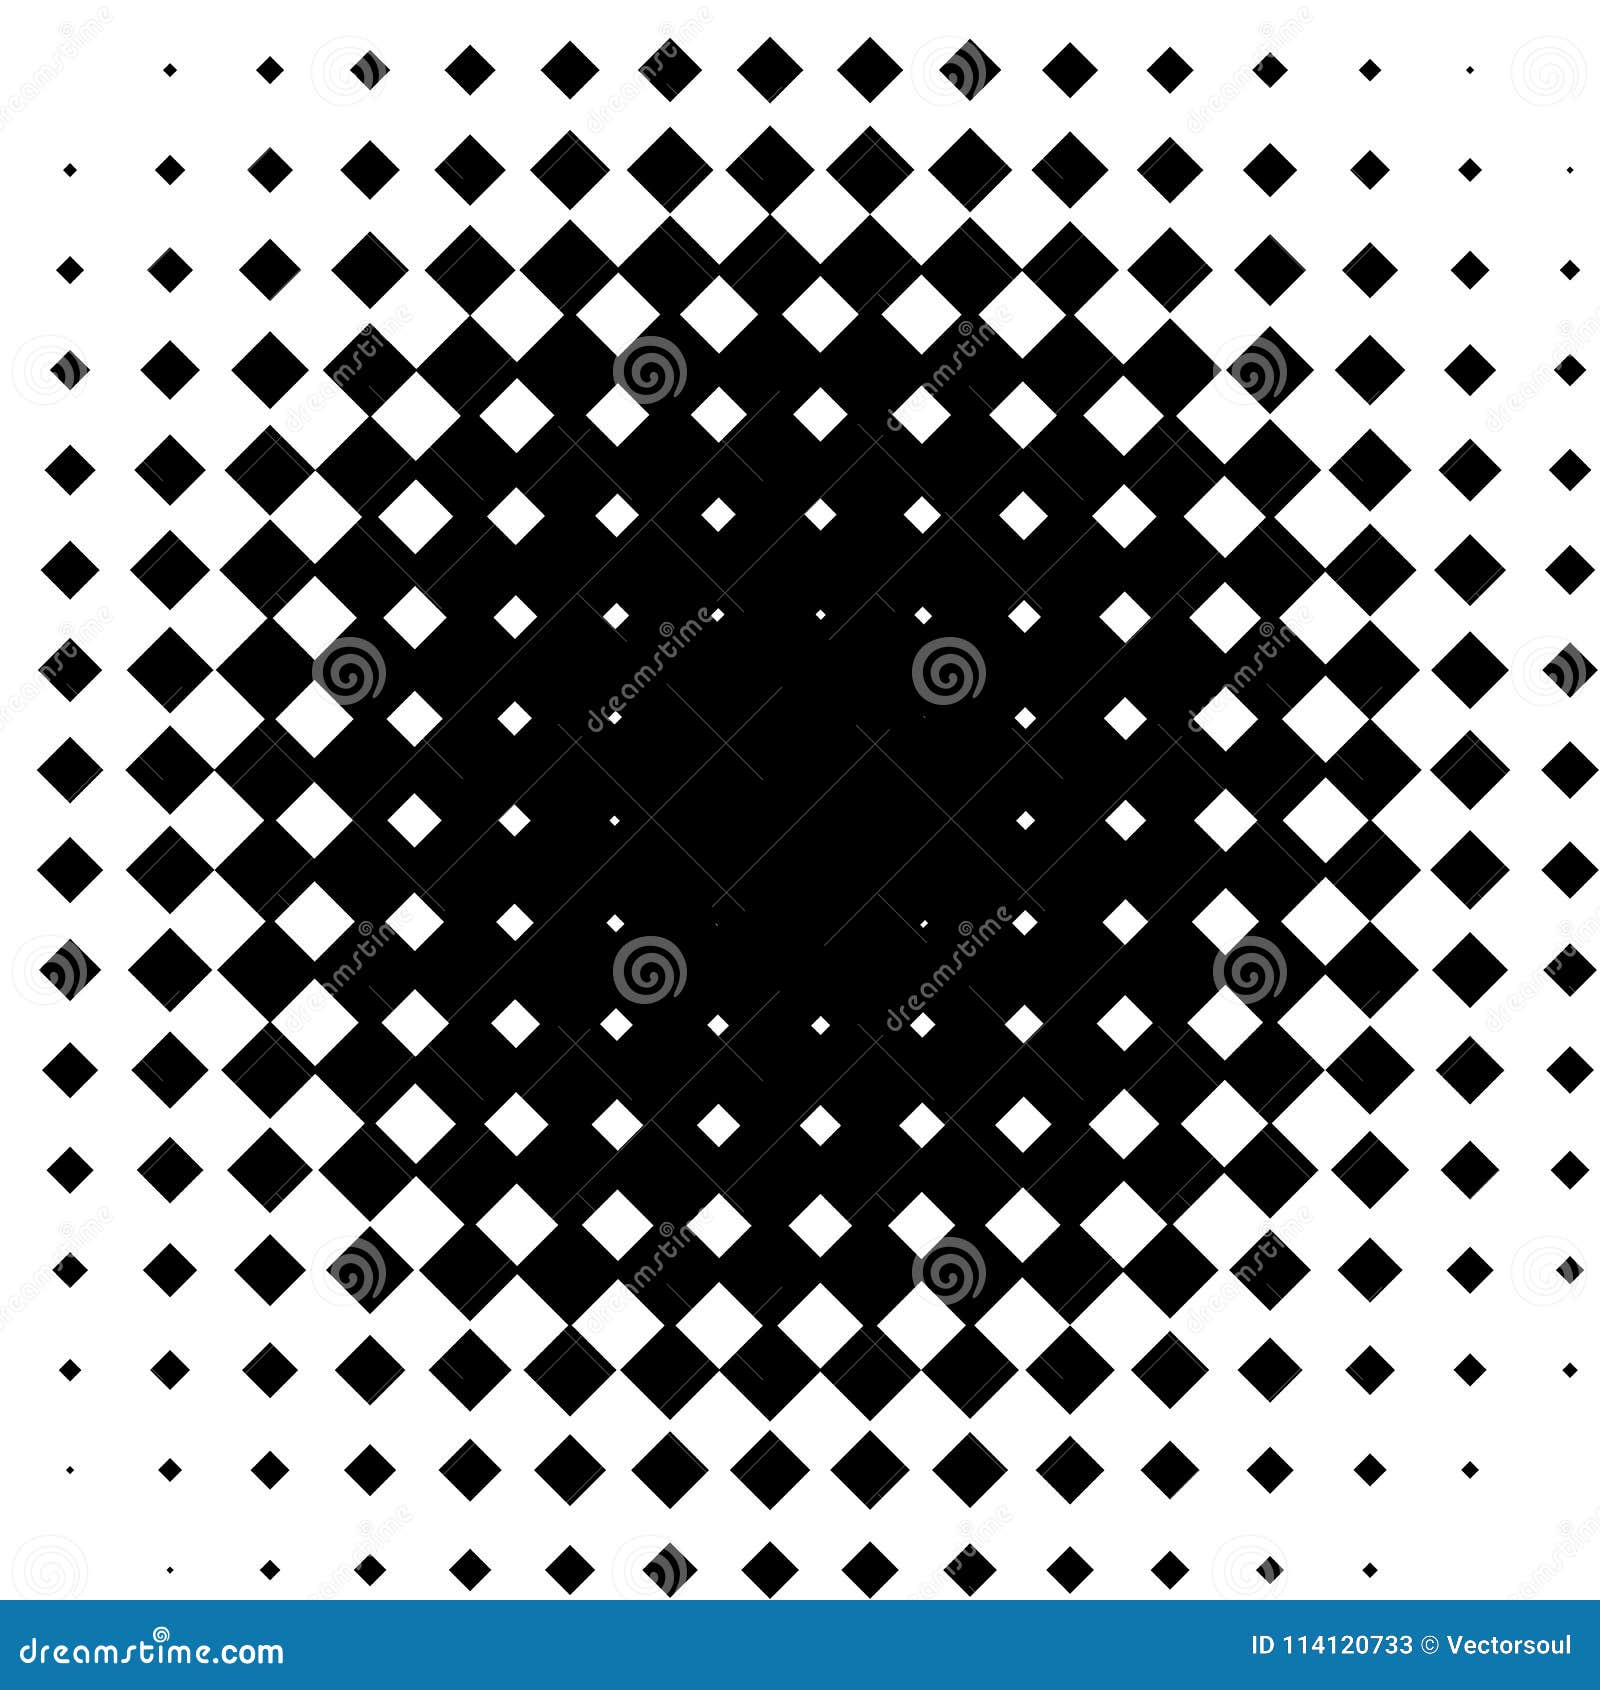 Halftone Element Abstract Geometric Graphic With Half Tone Pattern